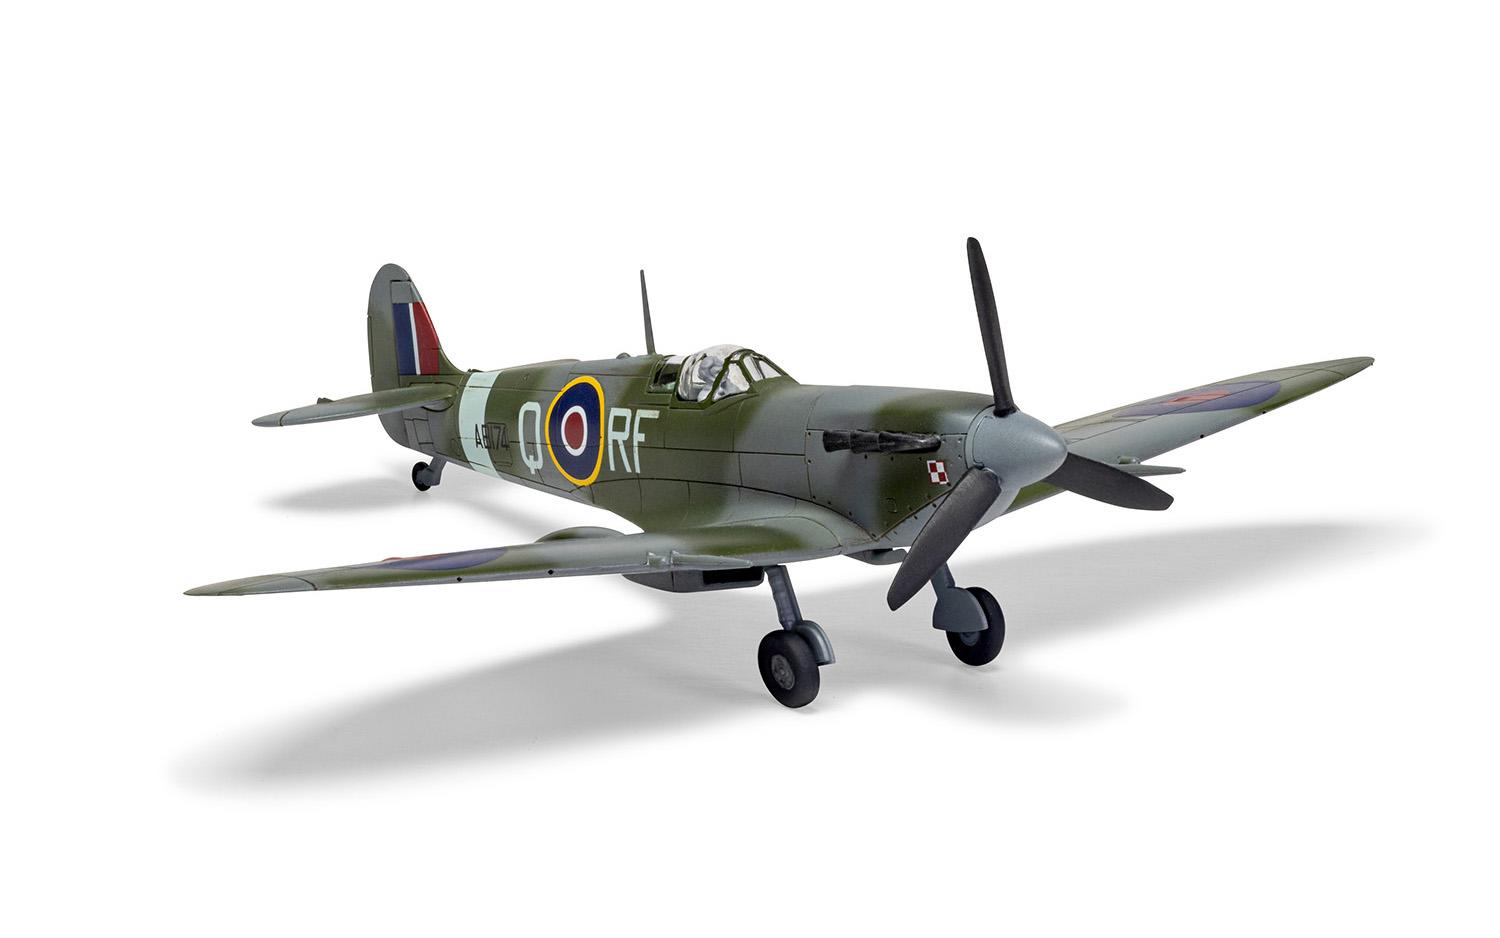 Scale model of a Spitfire airplane on a white surface. White background.